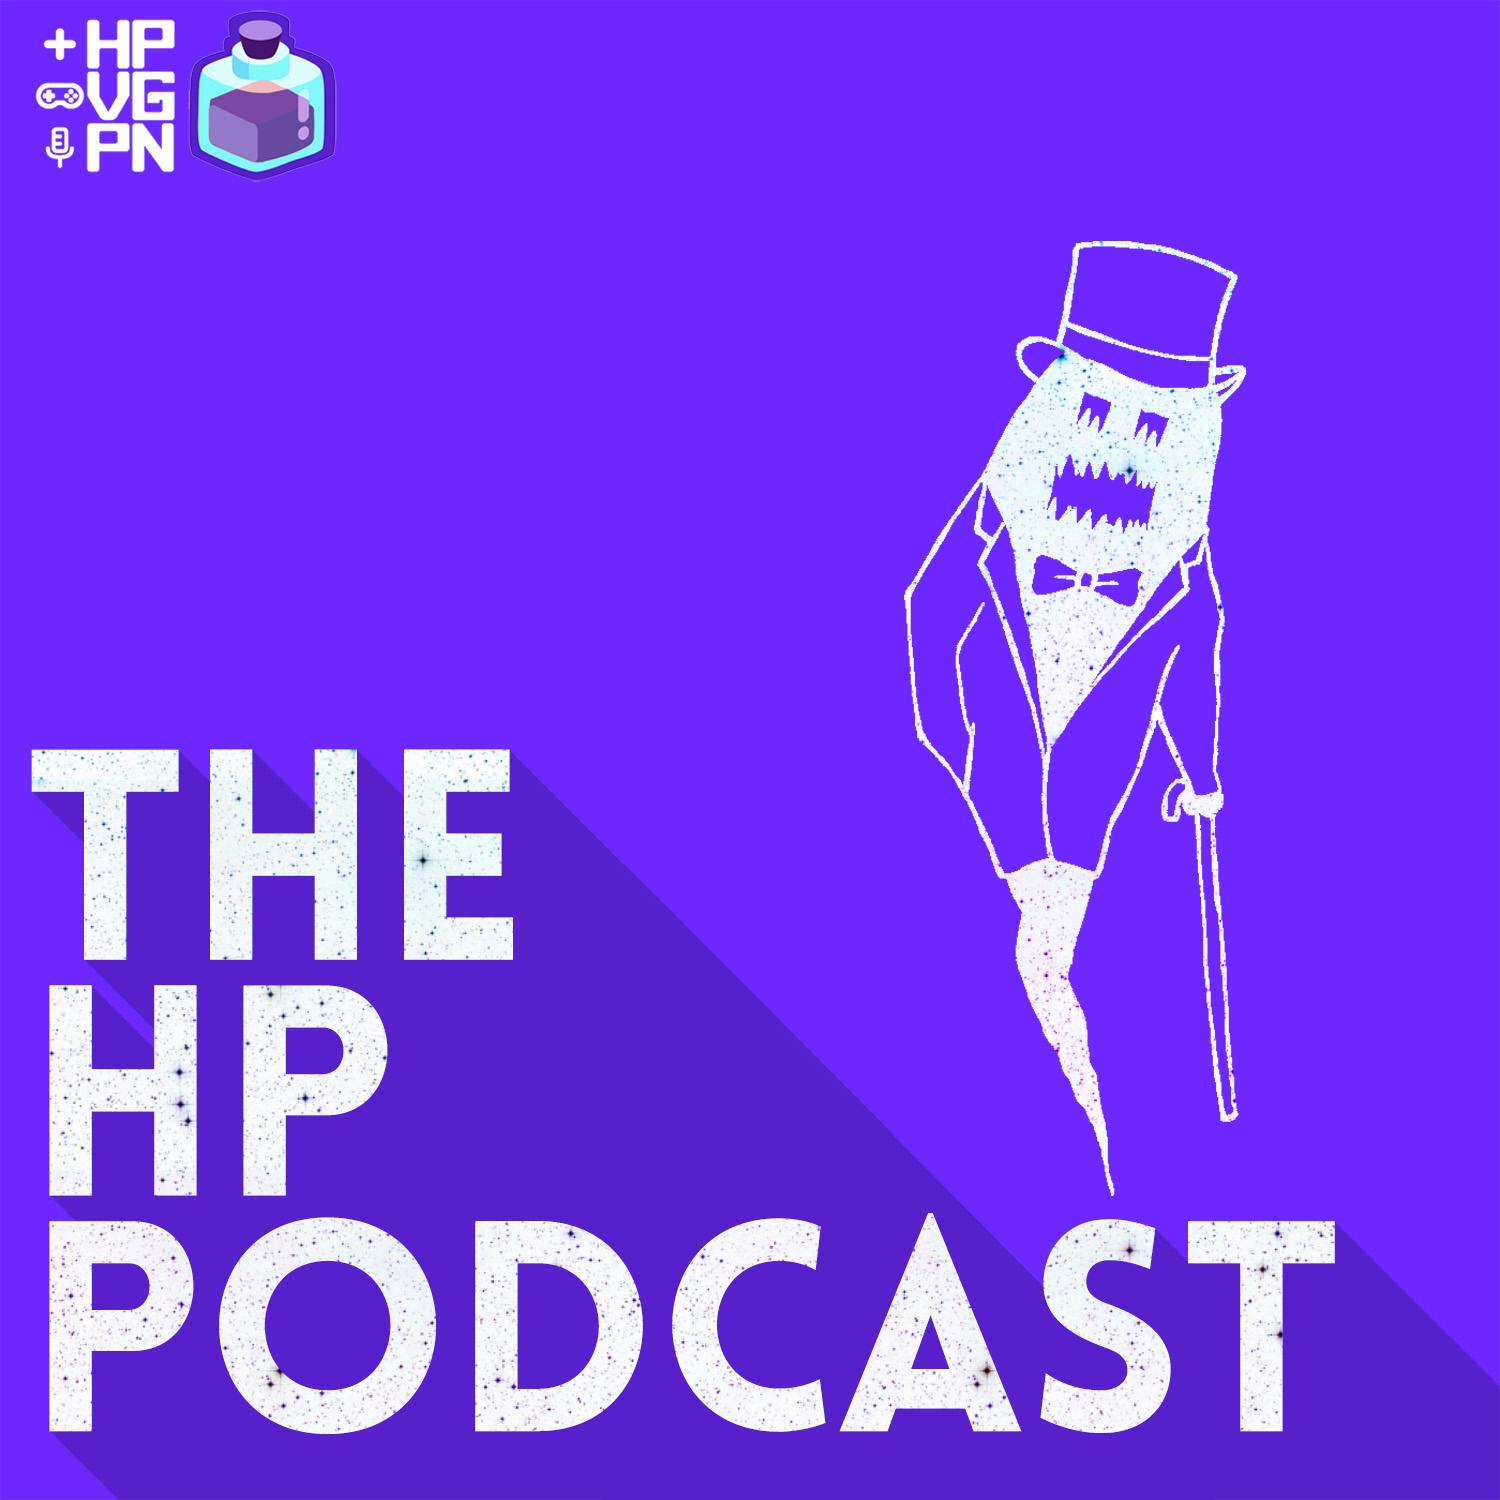 Xbox's Major Mistake - The HP Podcast Episode 106